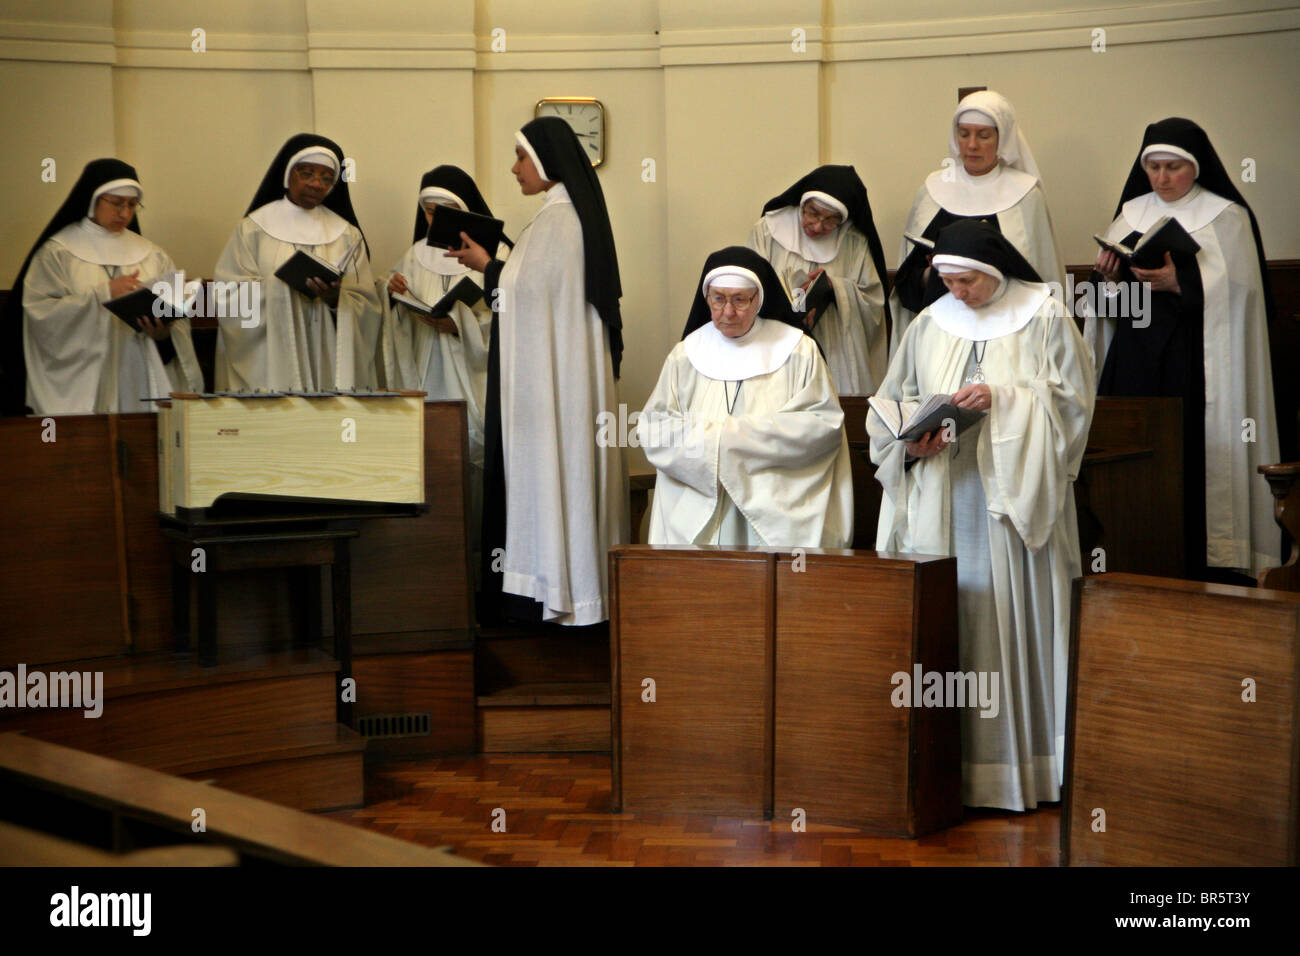 Sisters sing prayers every afternoon at the Tyburn Convent on Bayswater Rd, London. Stock Photo